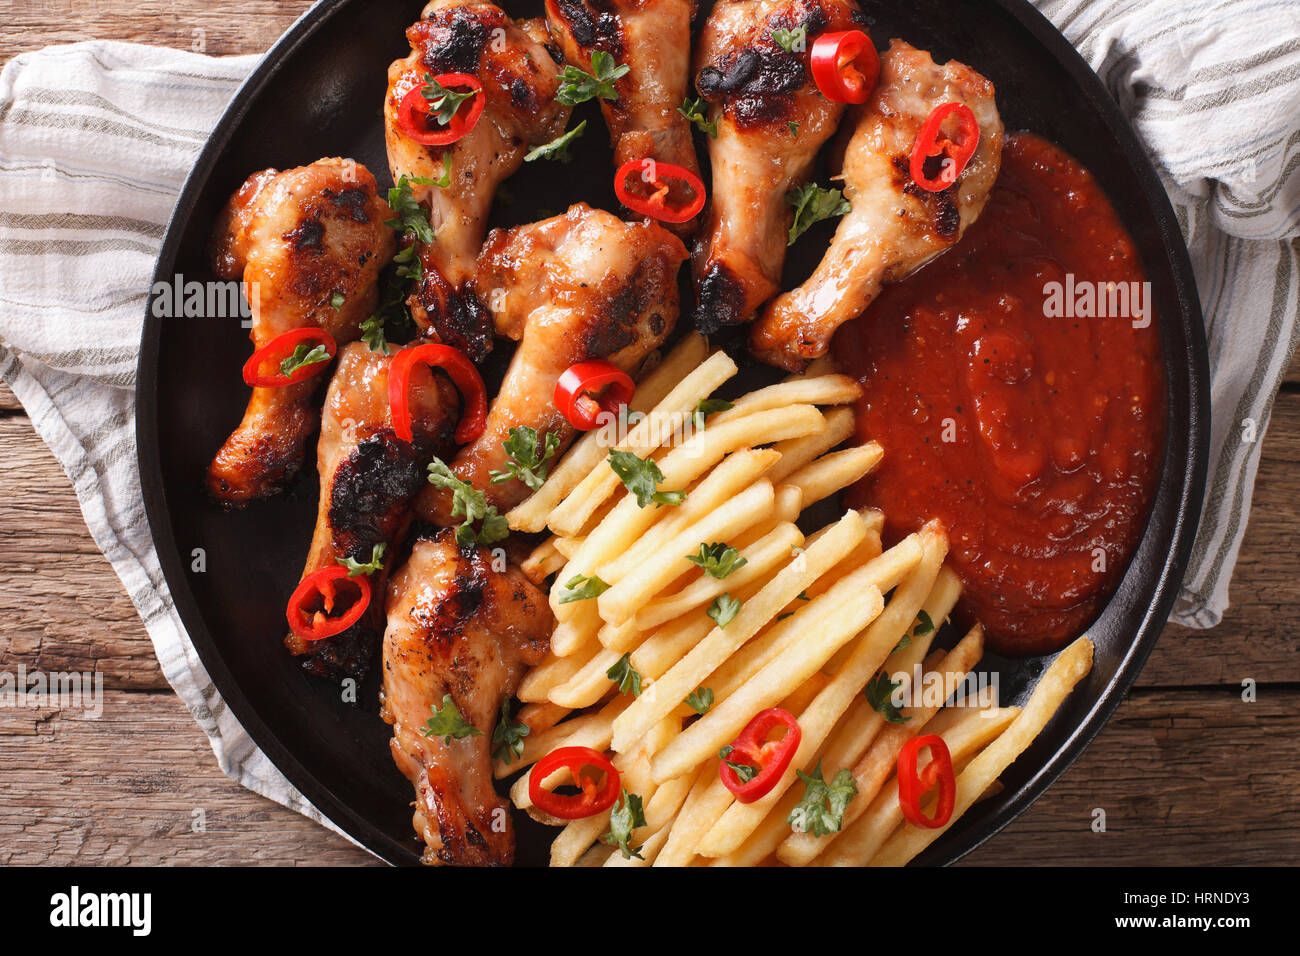 Grilled chicken wings with french fries and ketchup on the table close-up. horizontal view from above Stock Photo